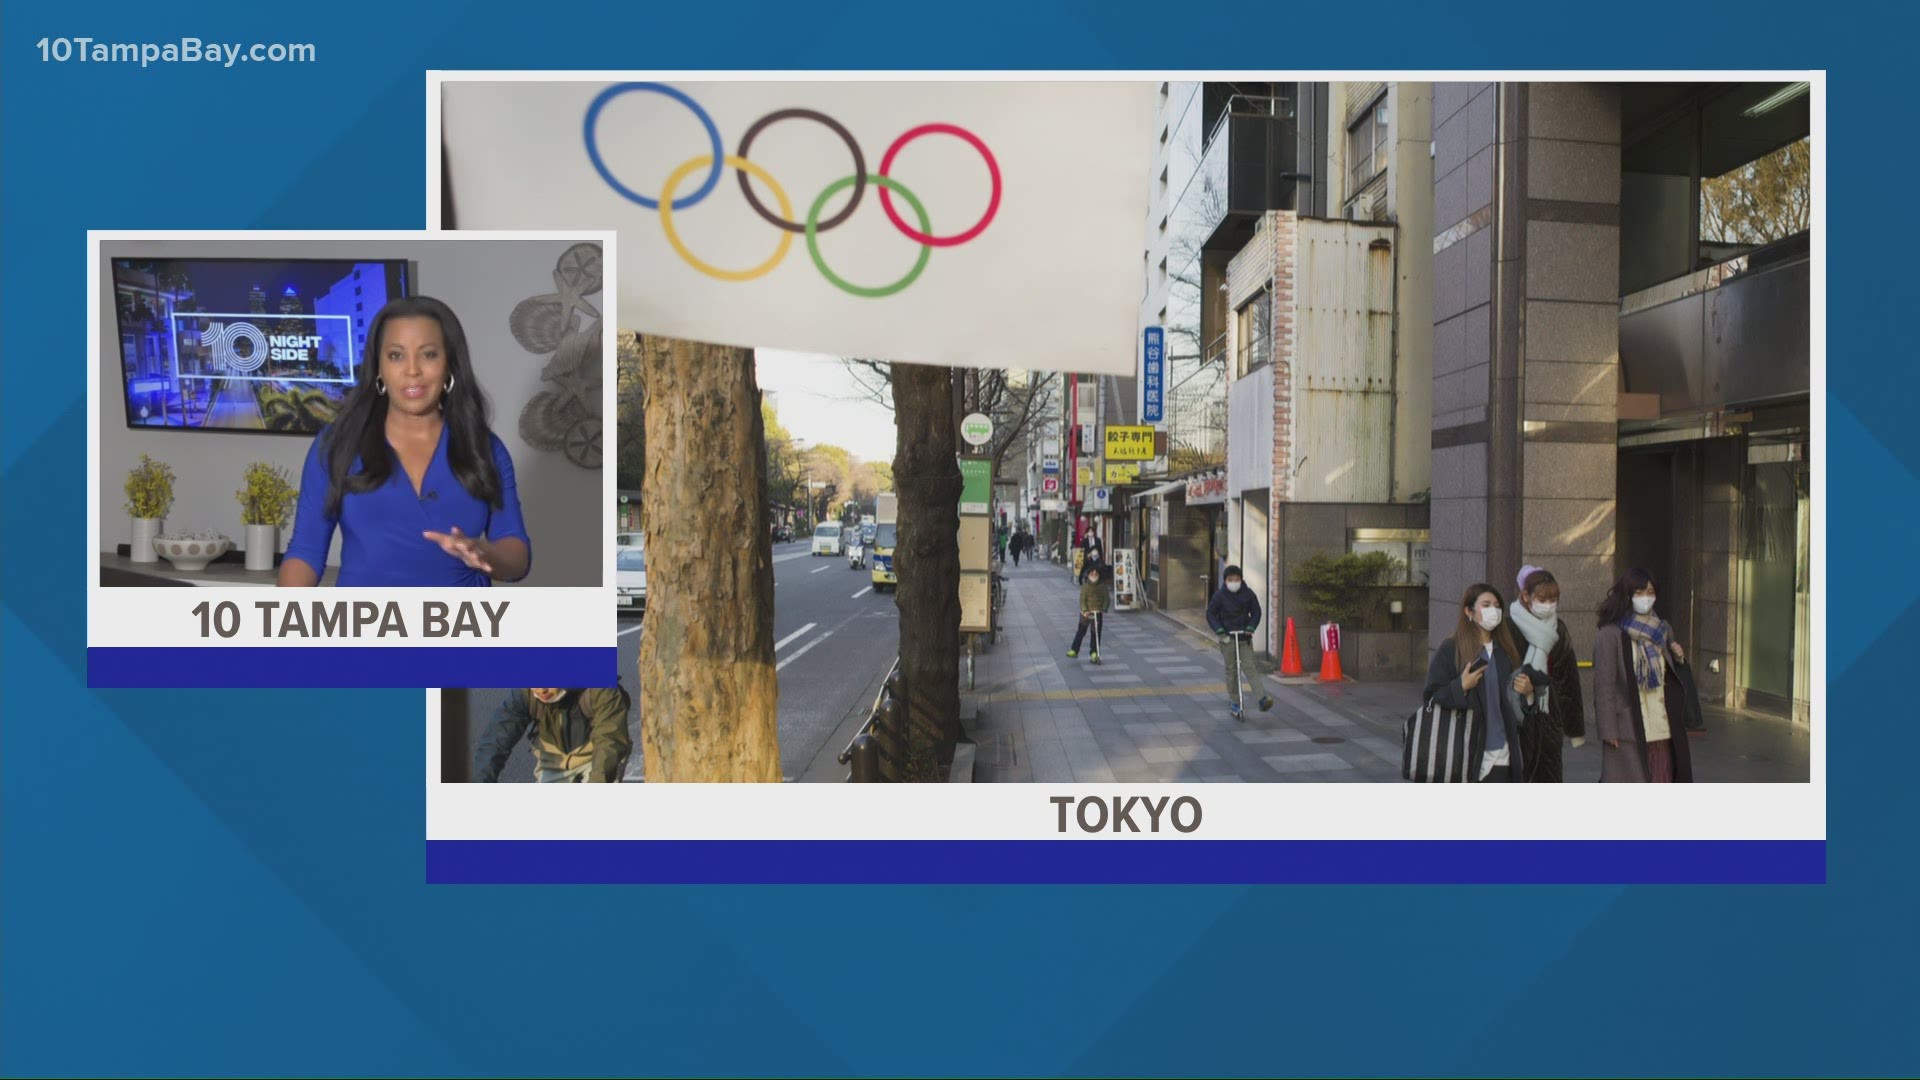 The report comes as the head of the IOC insists the Games will go on and Japan's Prime Minister said he is determined to make the Tokyo Olympics happen. An official